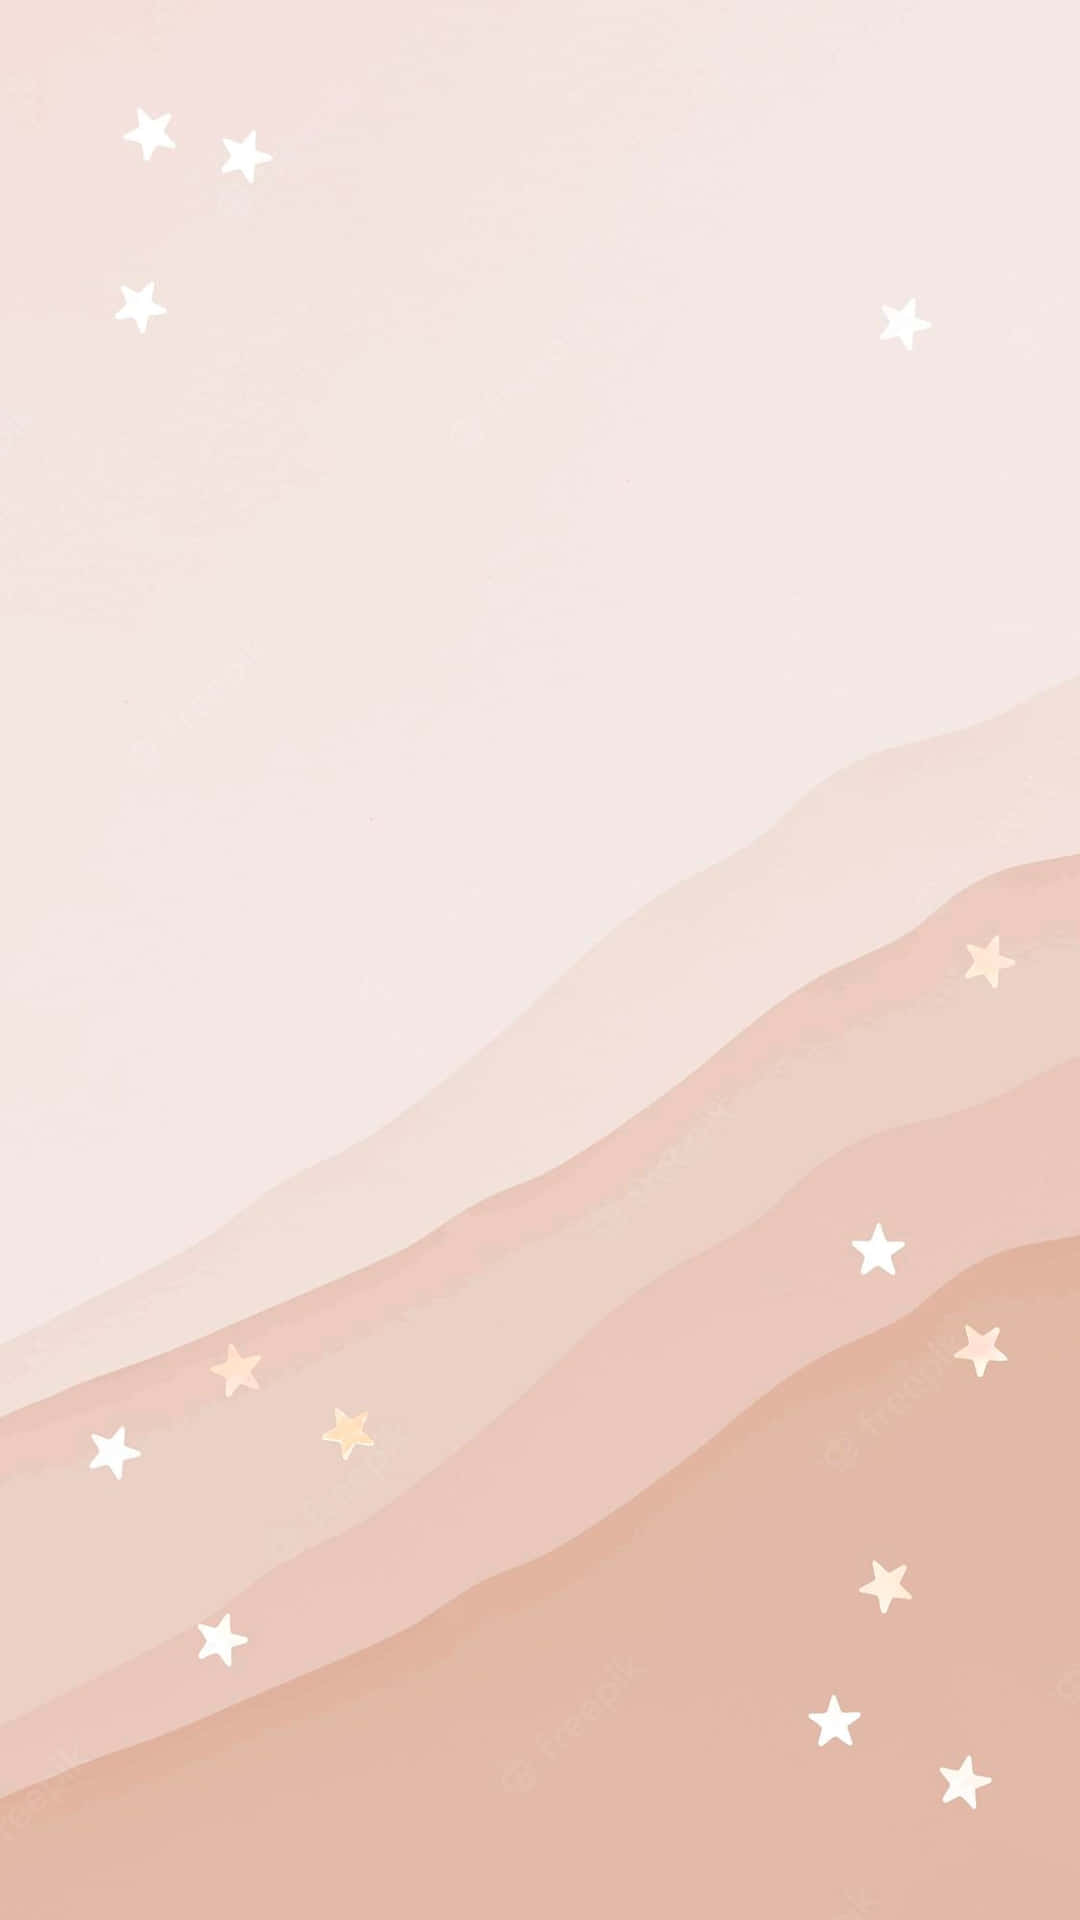 Pinks And Nudes For Instagram Stories Wallpaper